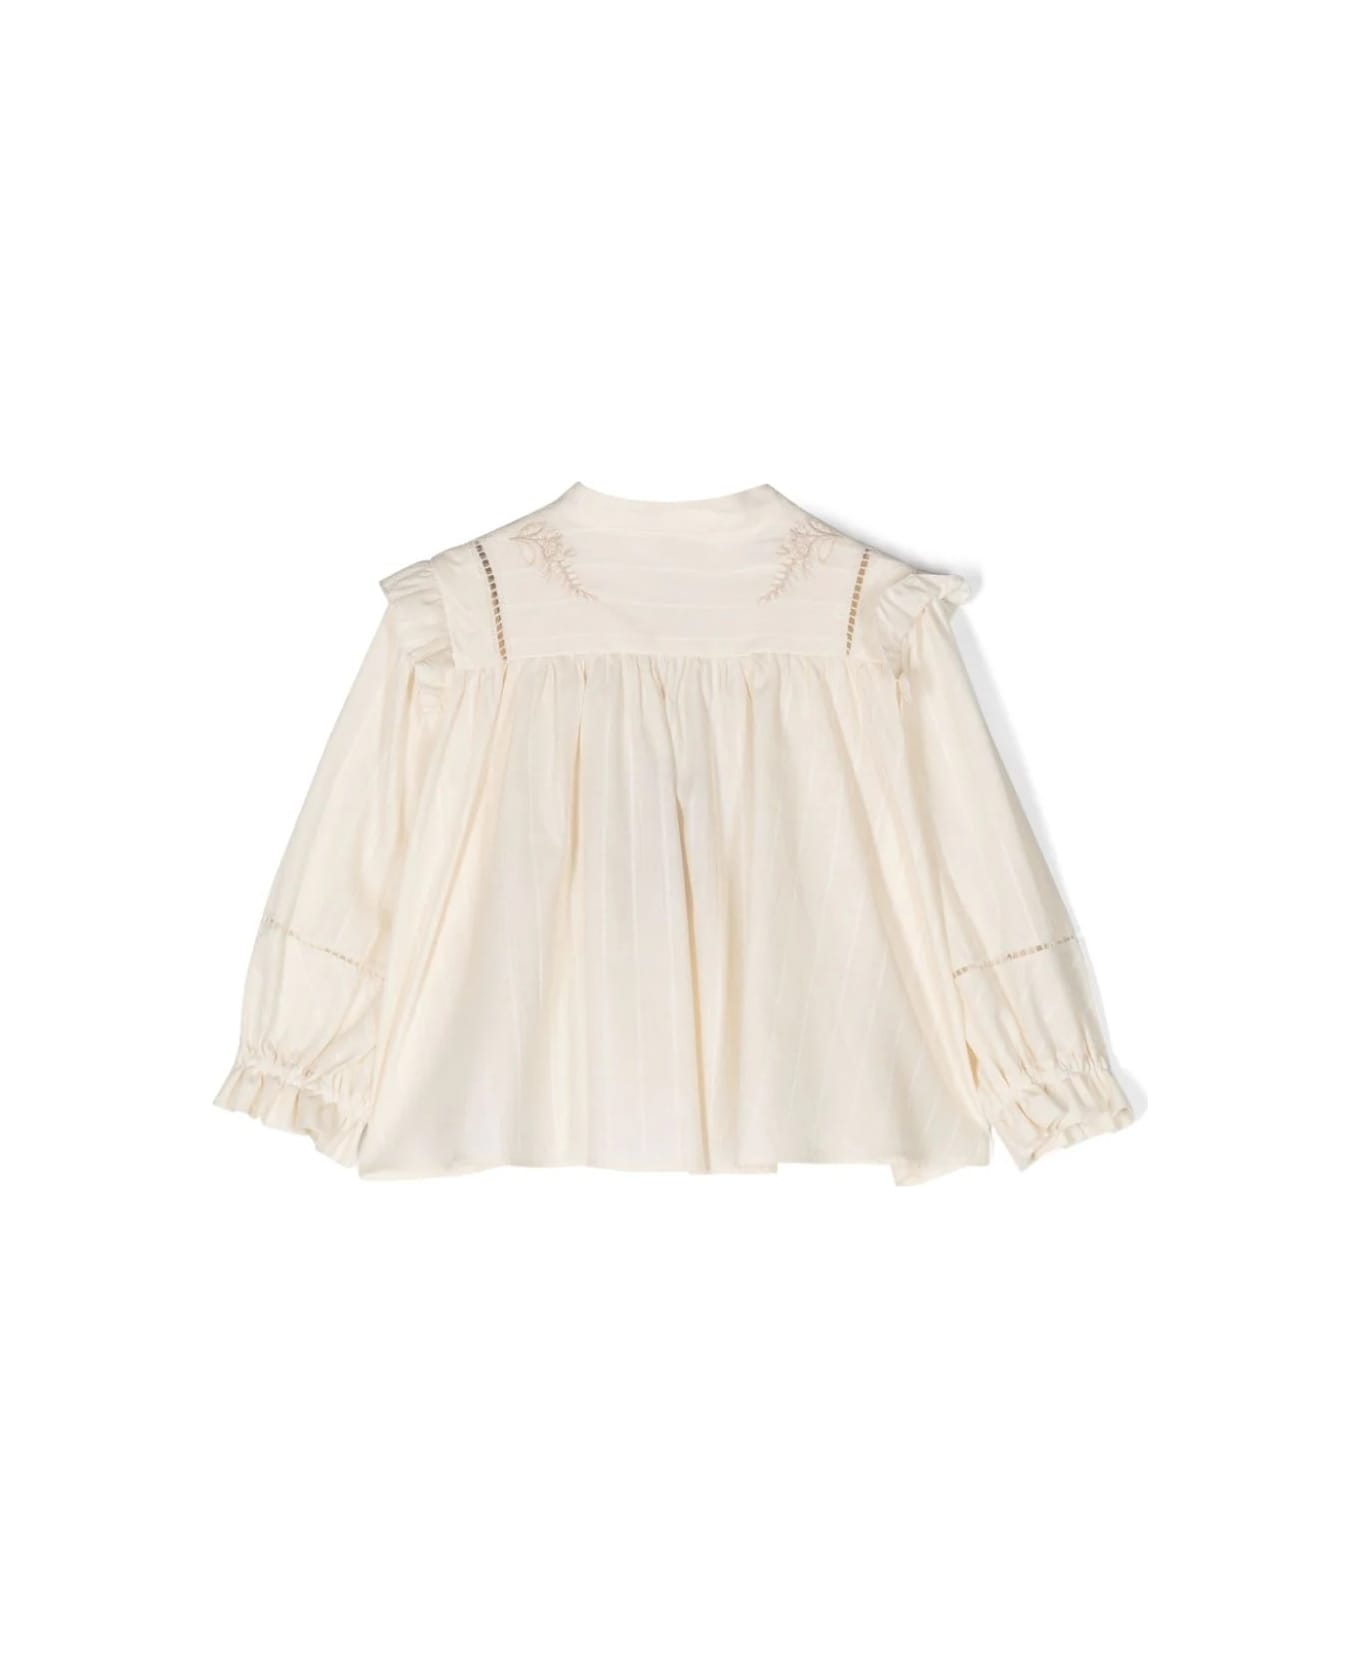 Etro Beige Pinstripe Blouse With Ruffles And Embroidery - Brown